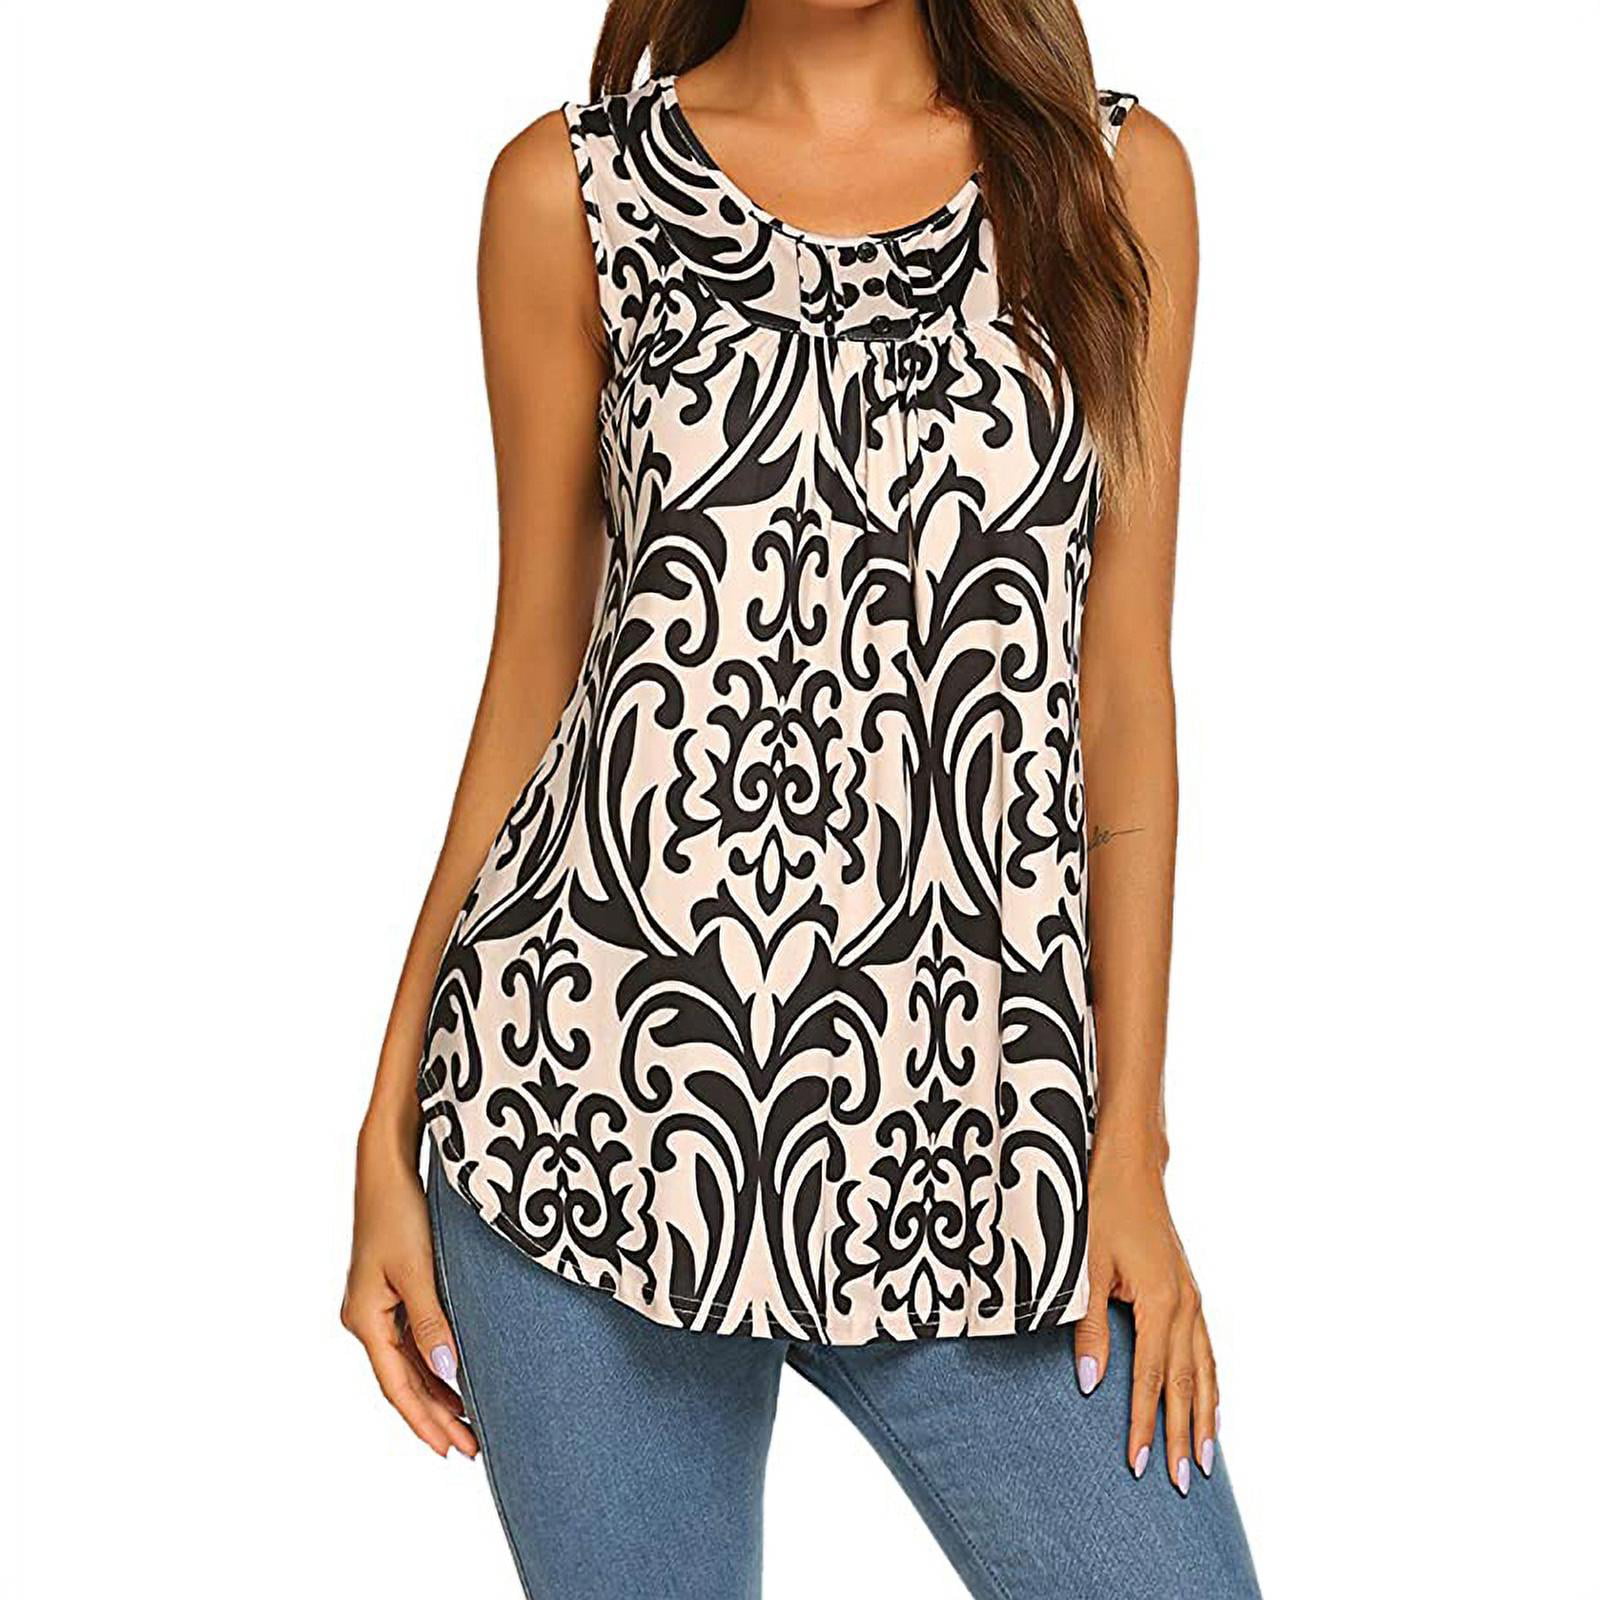 Women's Paisley Printed Pleated Sleeveless Blouse Shirt Casual Flare Tunic Tank Top